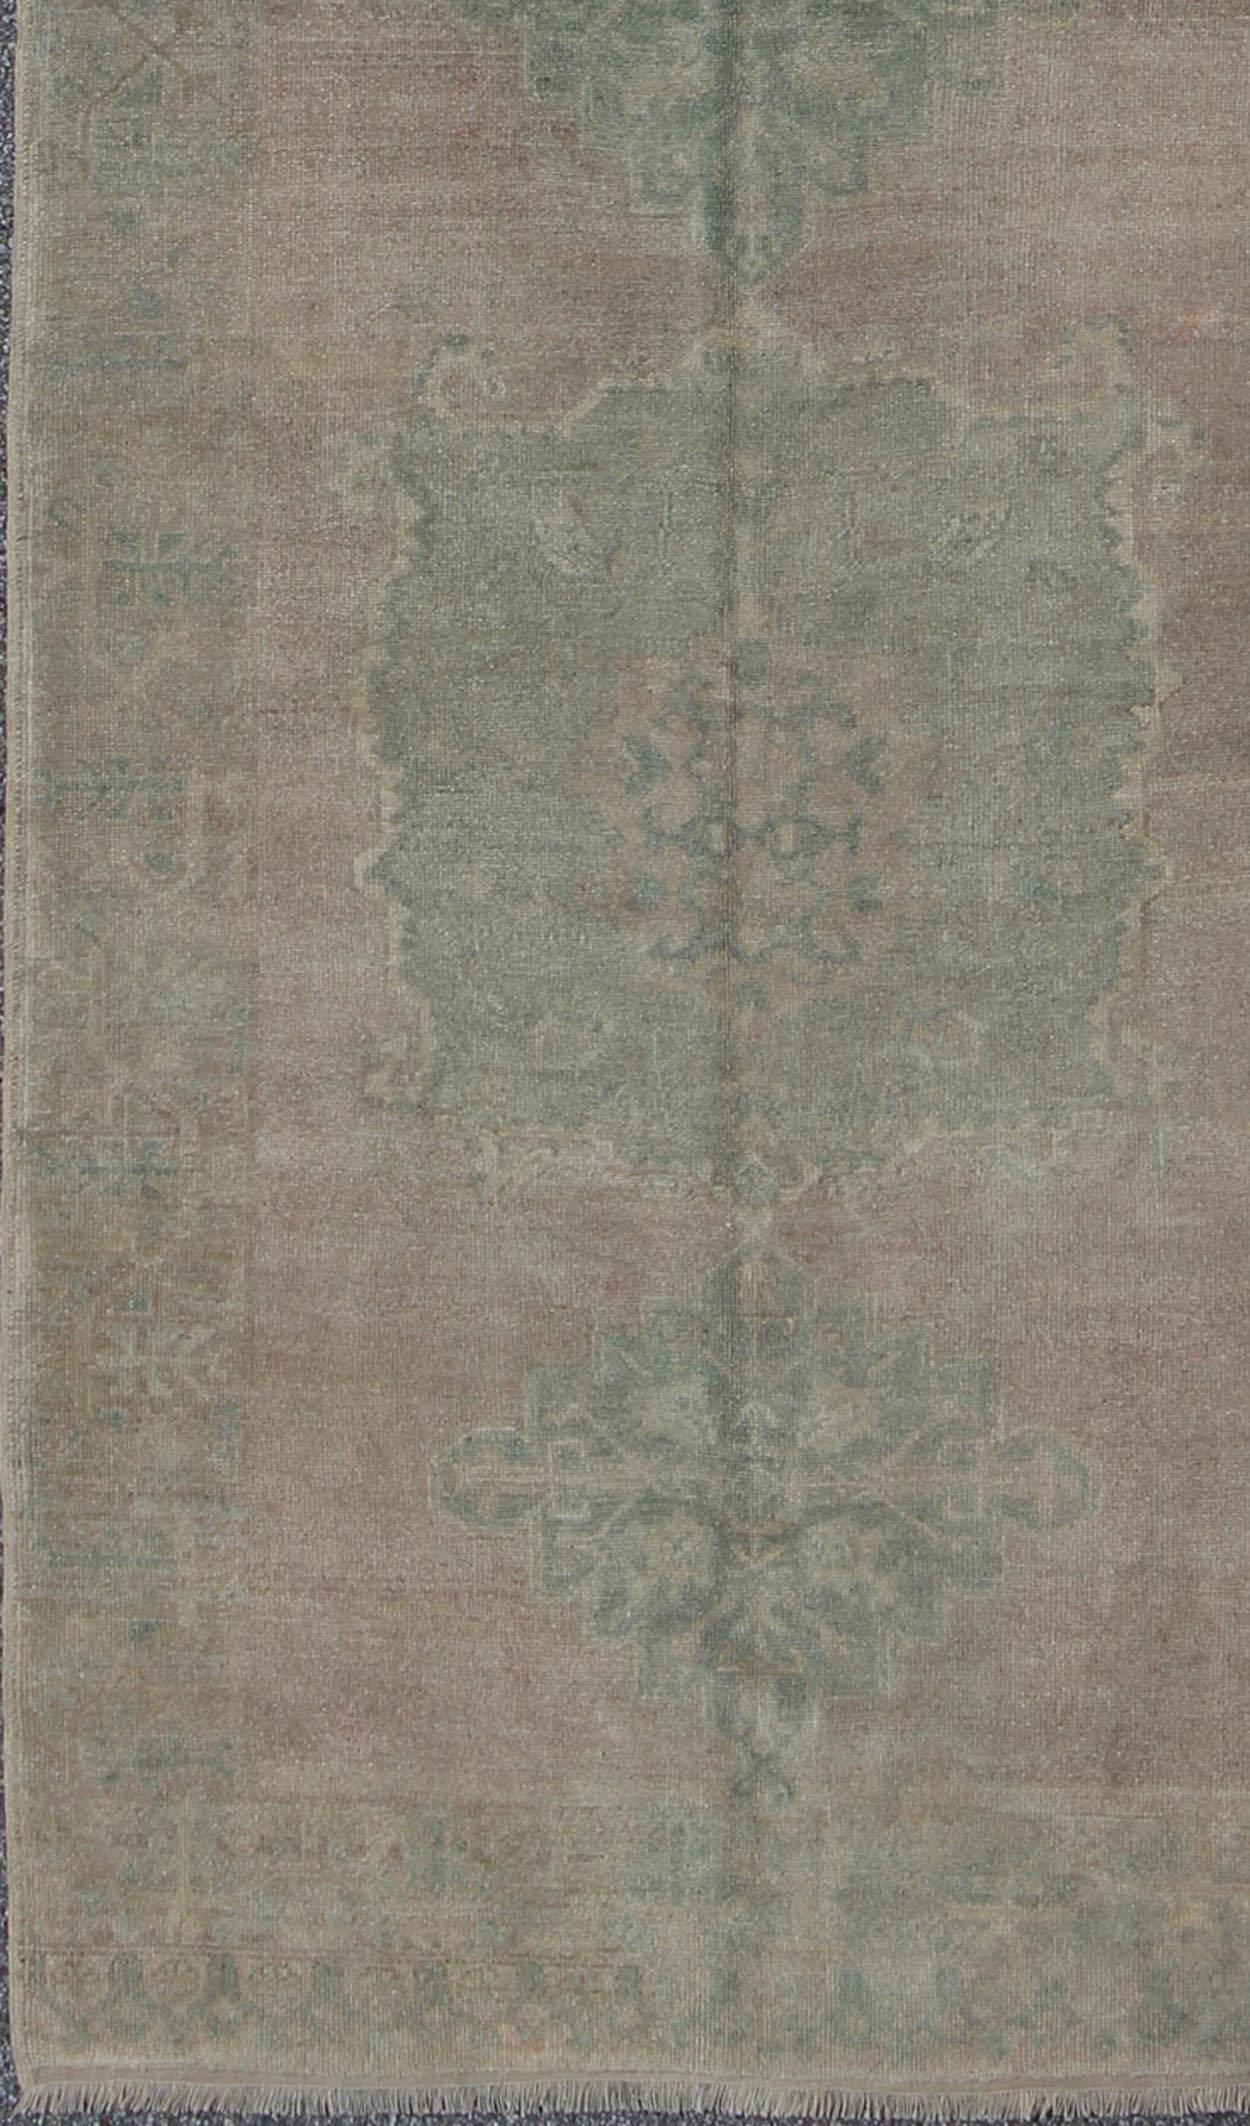 Faded Vintage Turkish Oushak runner with dual-medallion in lavender and green, rug fah-95192 , country of origin / type: Turkey / Oushak, circa mid-20th century

This faded Turkish runner features a dual central medallion design as well as